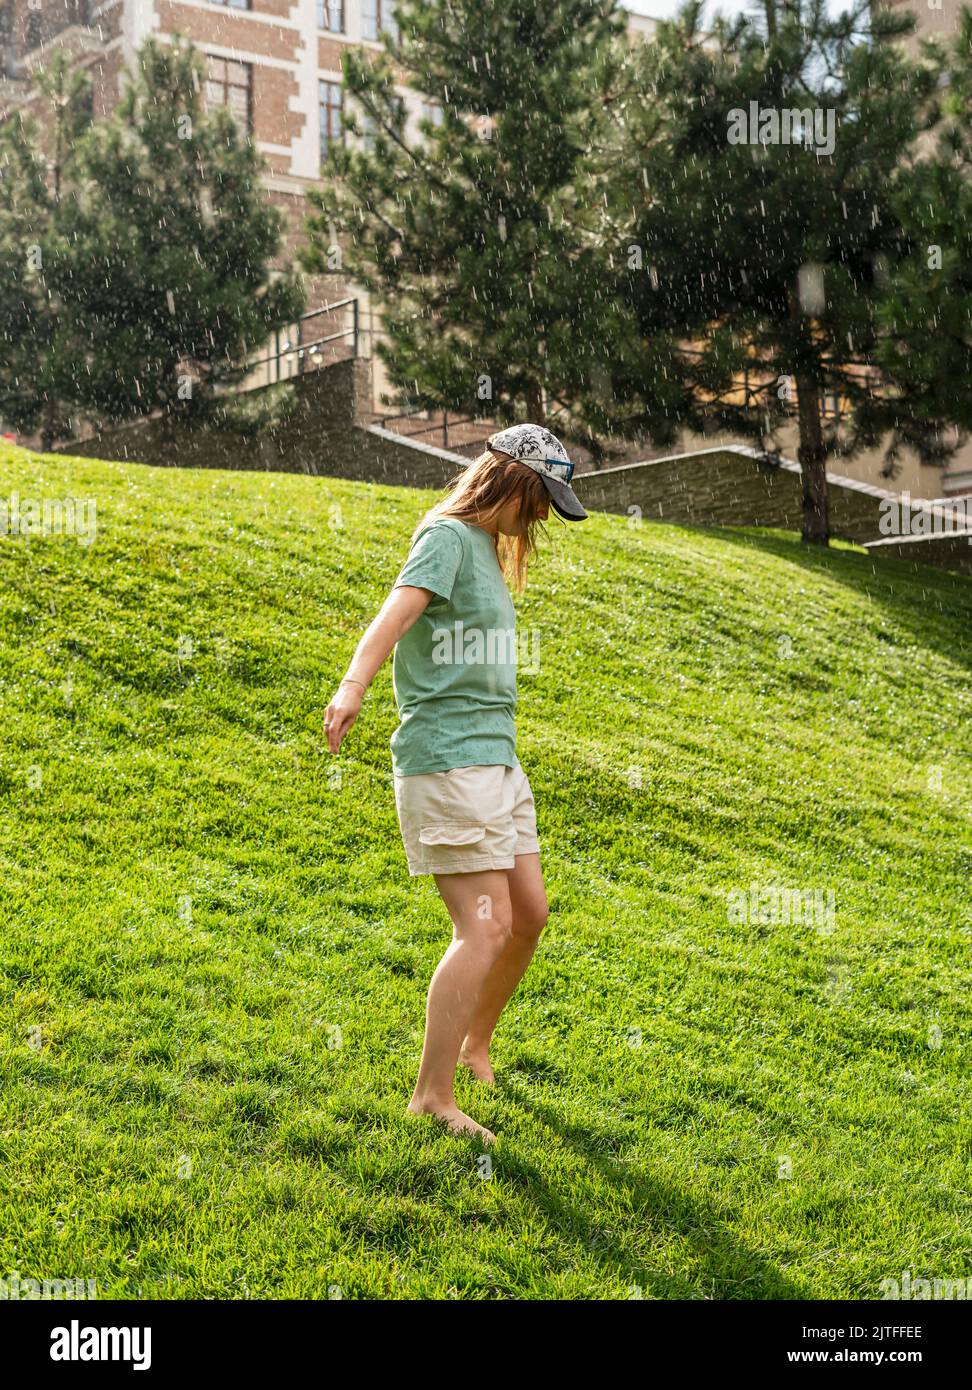 happy young woman barefoot walking on green grass lawn enjoying the ...